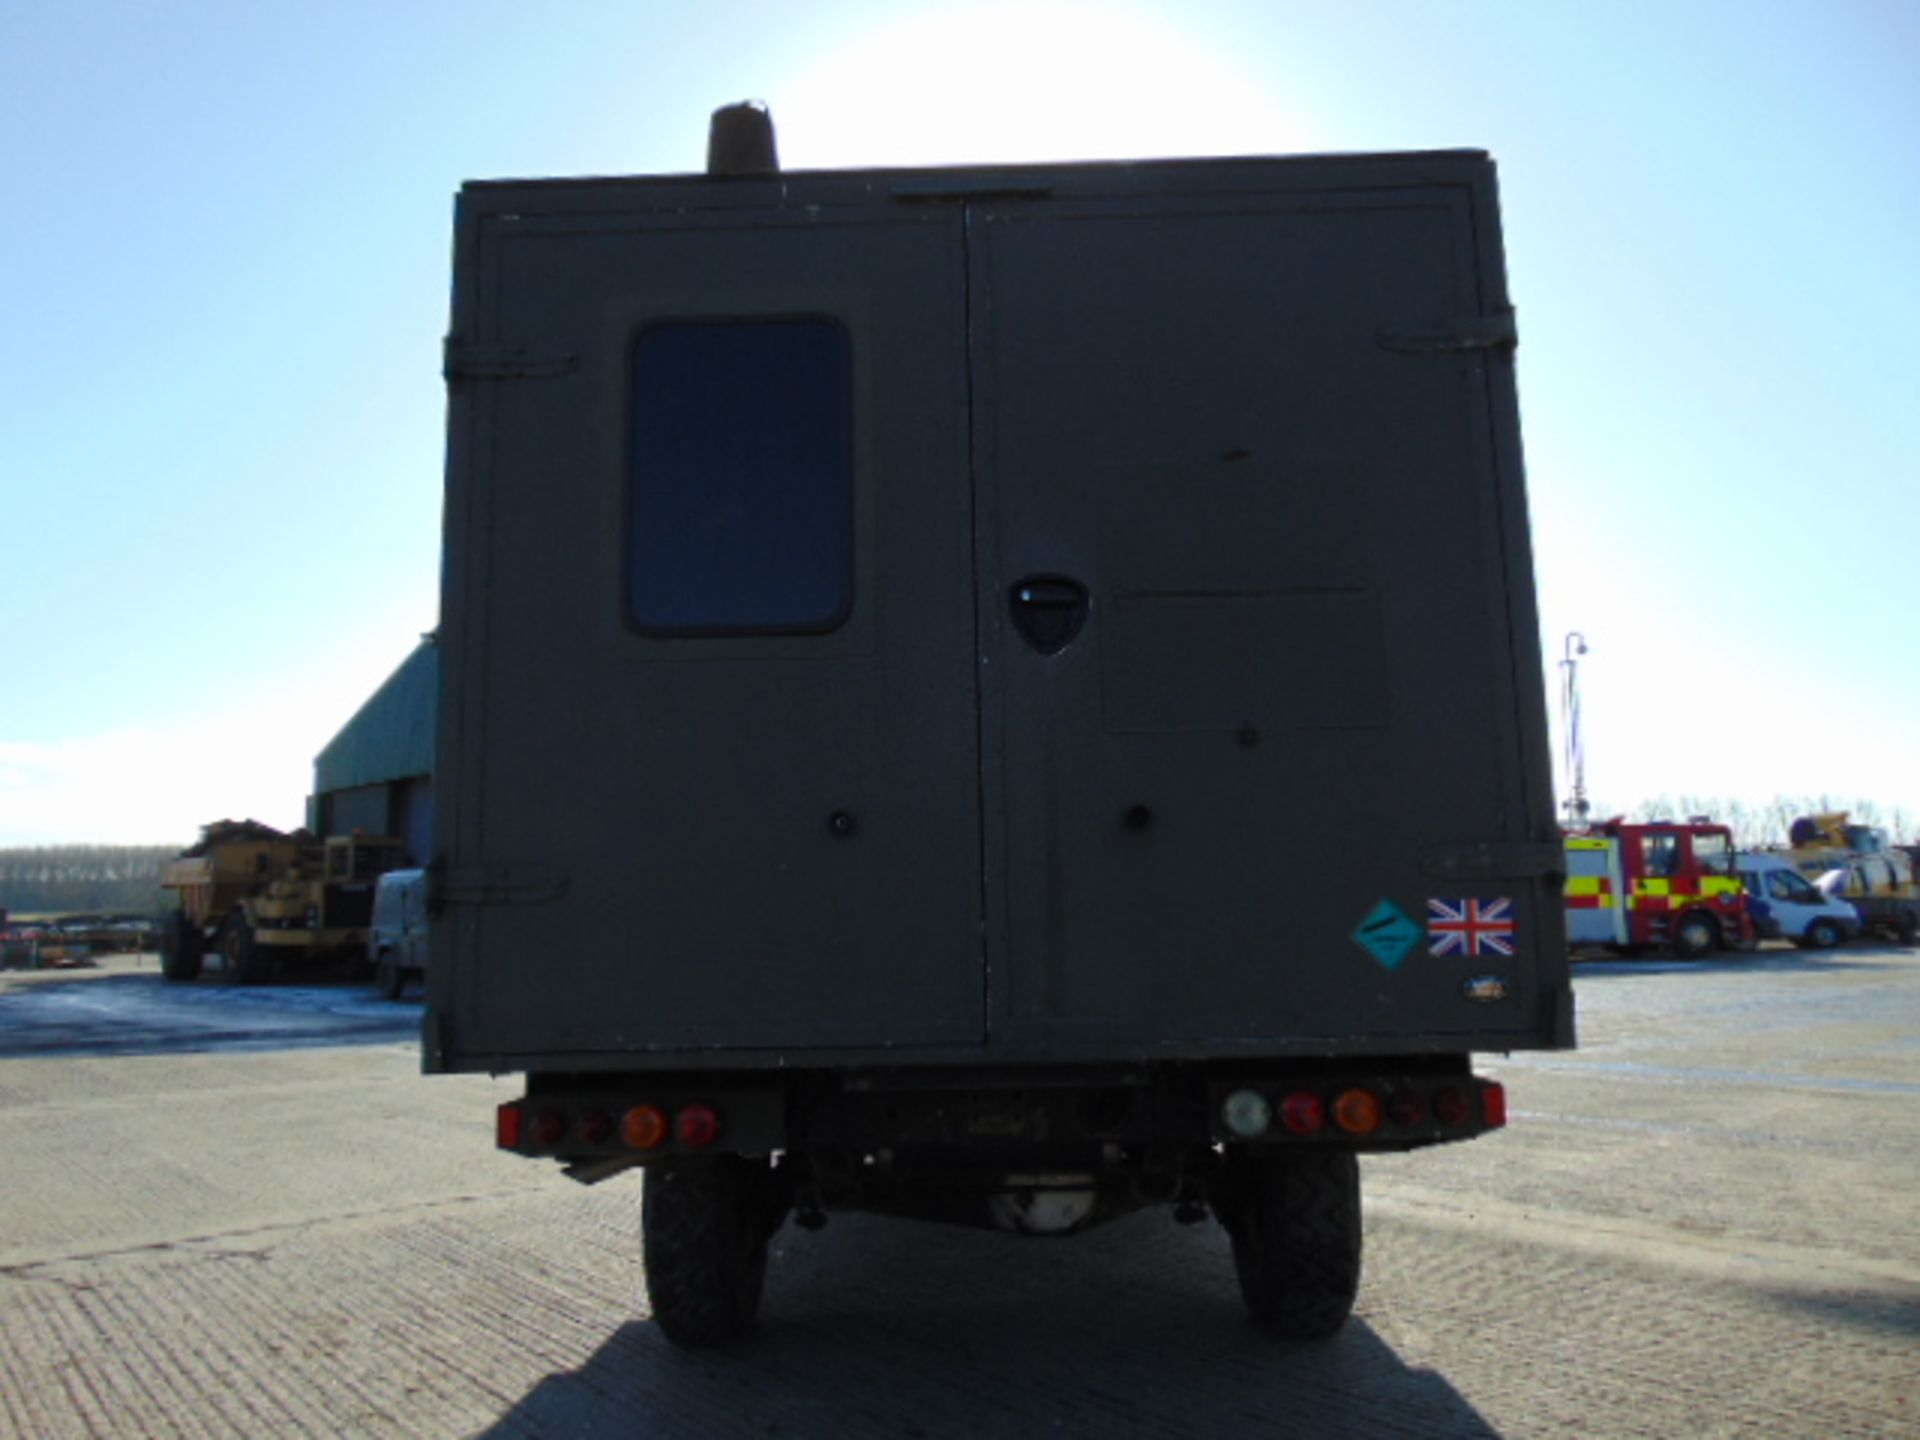 Military Specification Land Rover Wolf 130 ambulance - Image 7 of 15